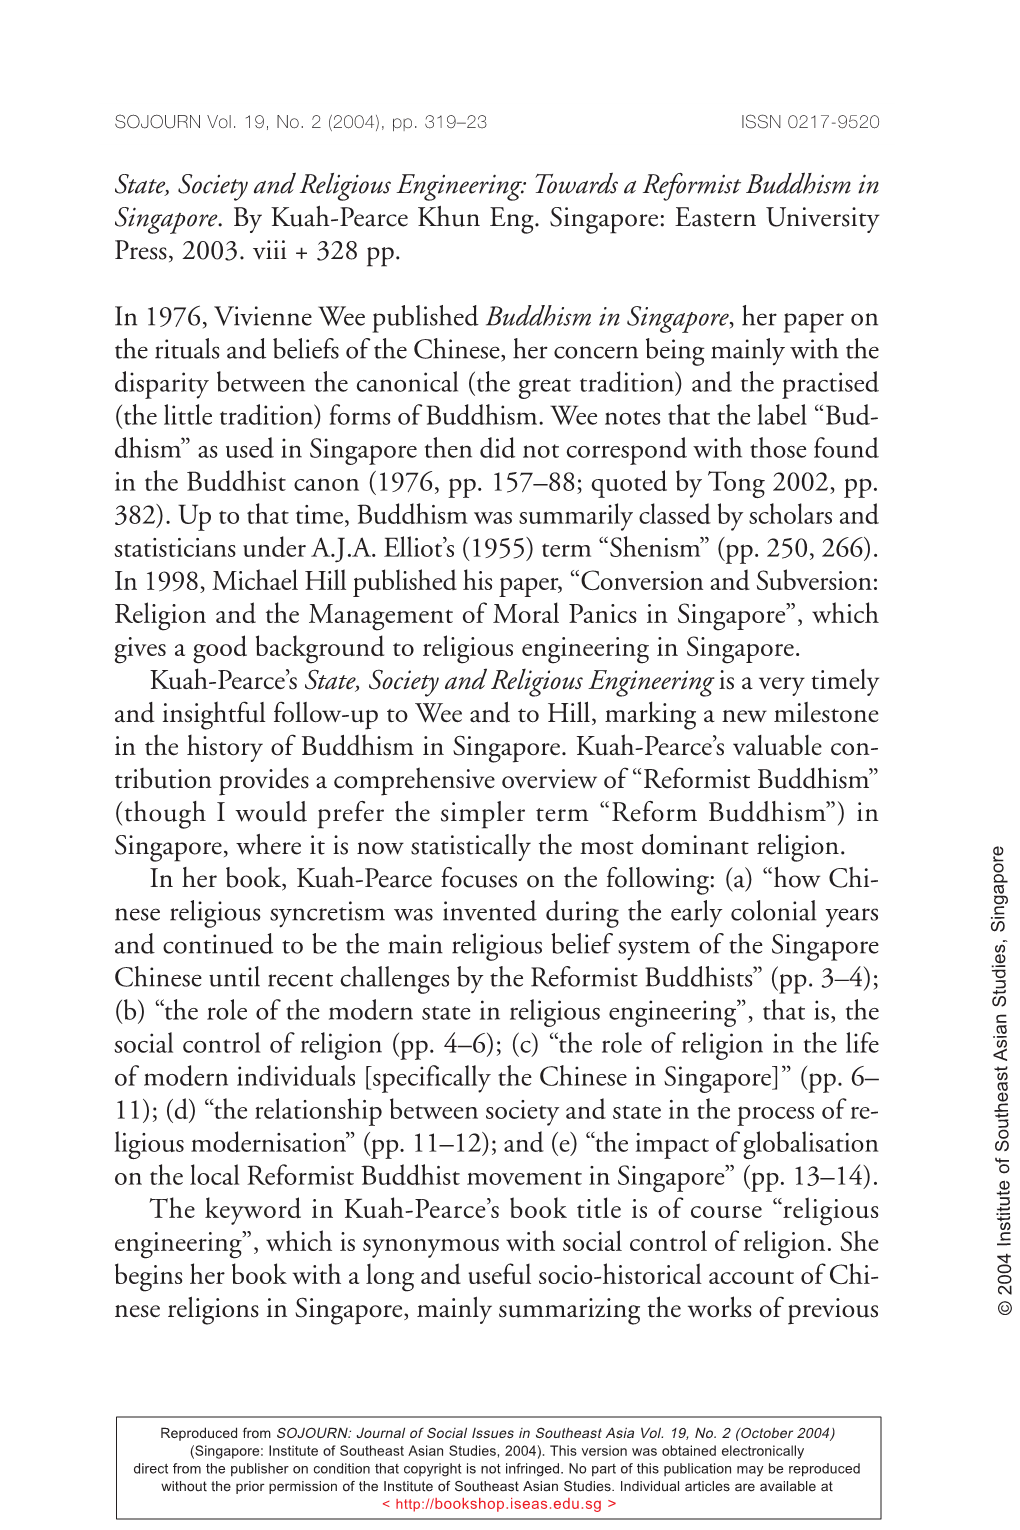 Towards a Reformist Buddhism in Singapore